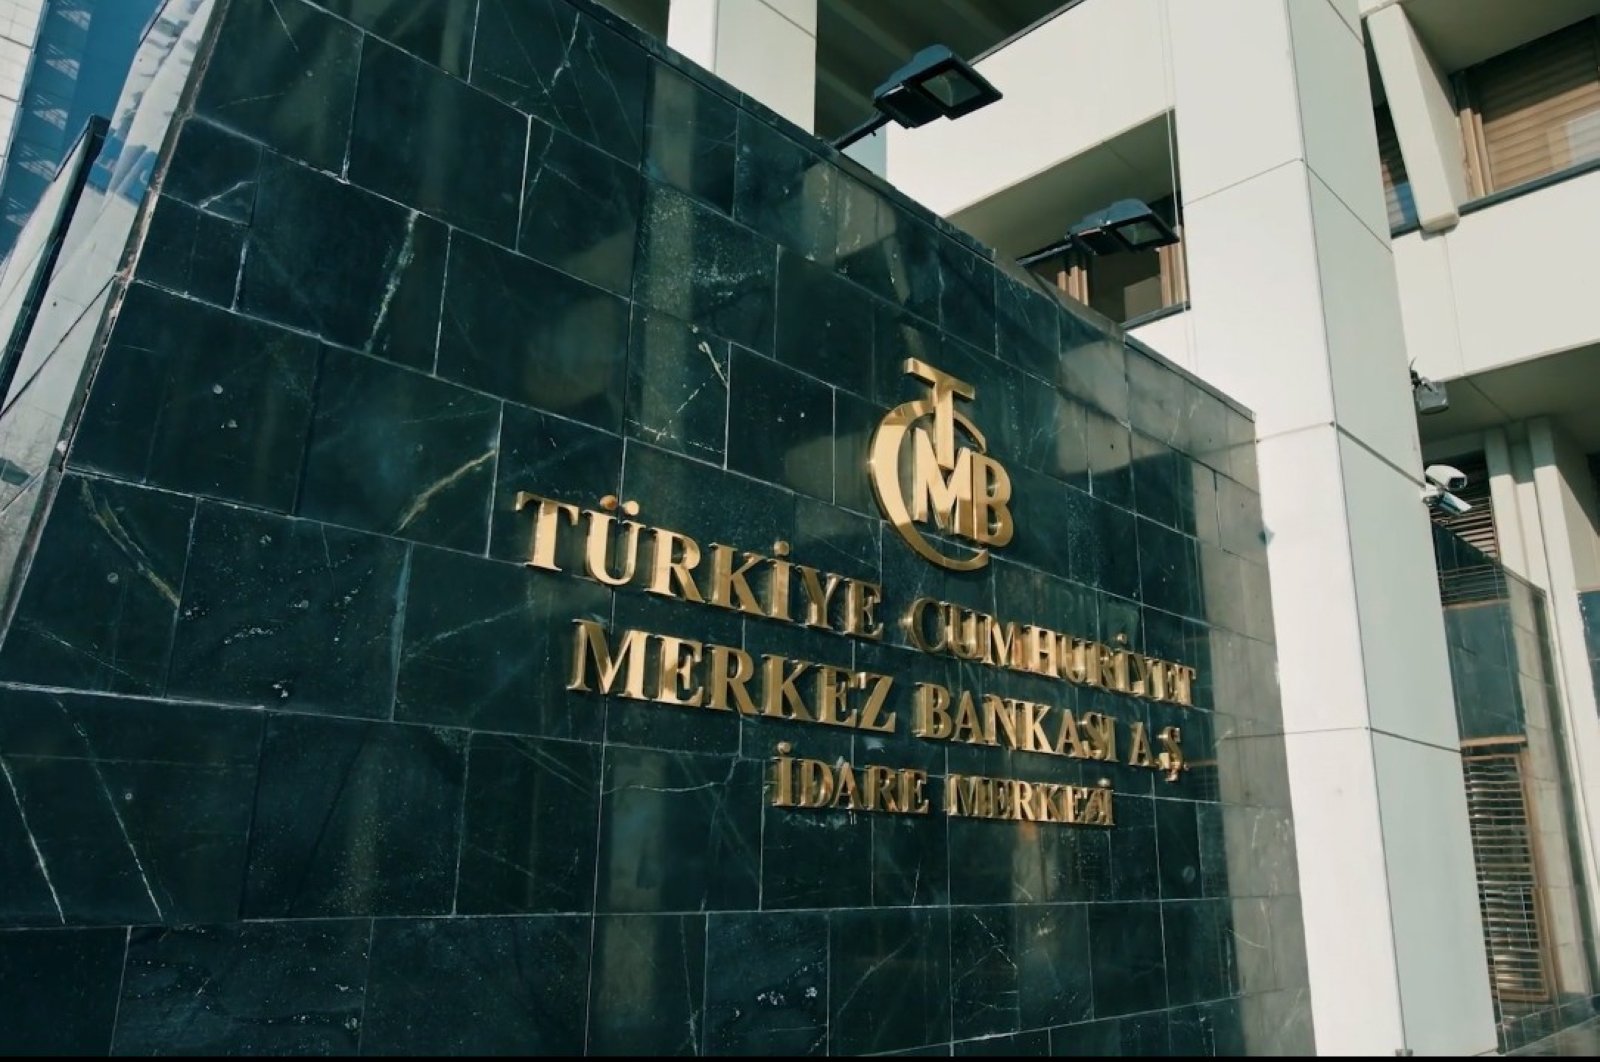 The Central Bank of the Republic of Turkey headquarters in Ankara, March 26, 2020. (IHA Photo)